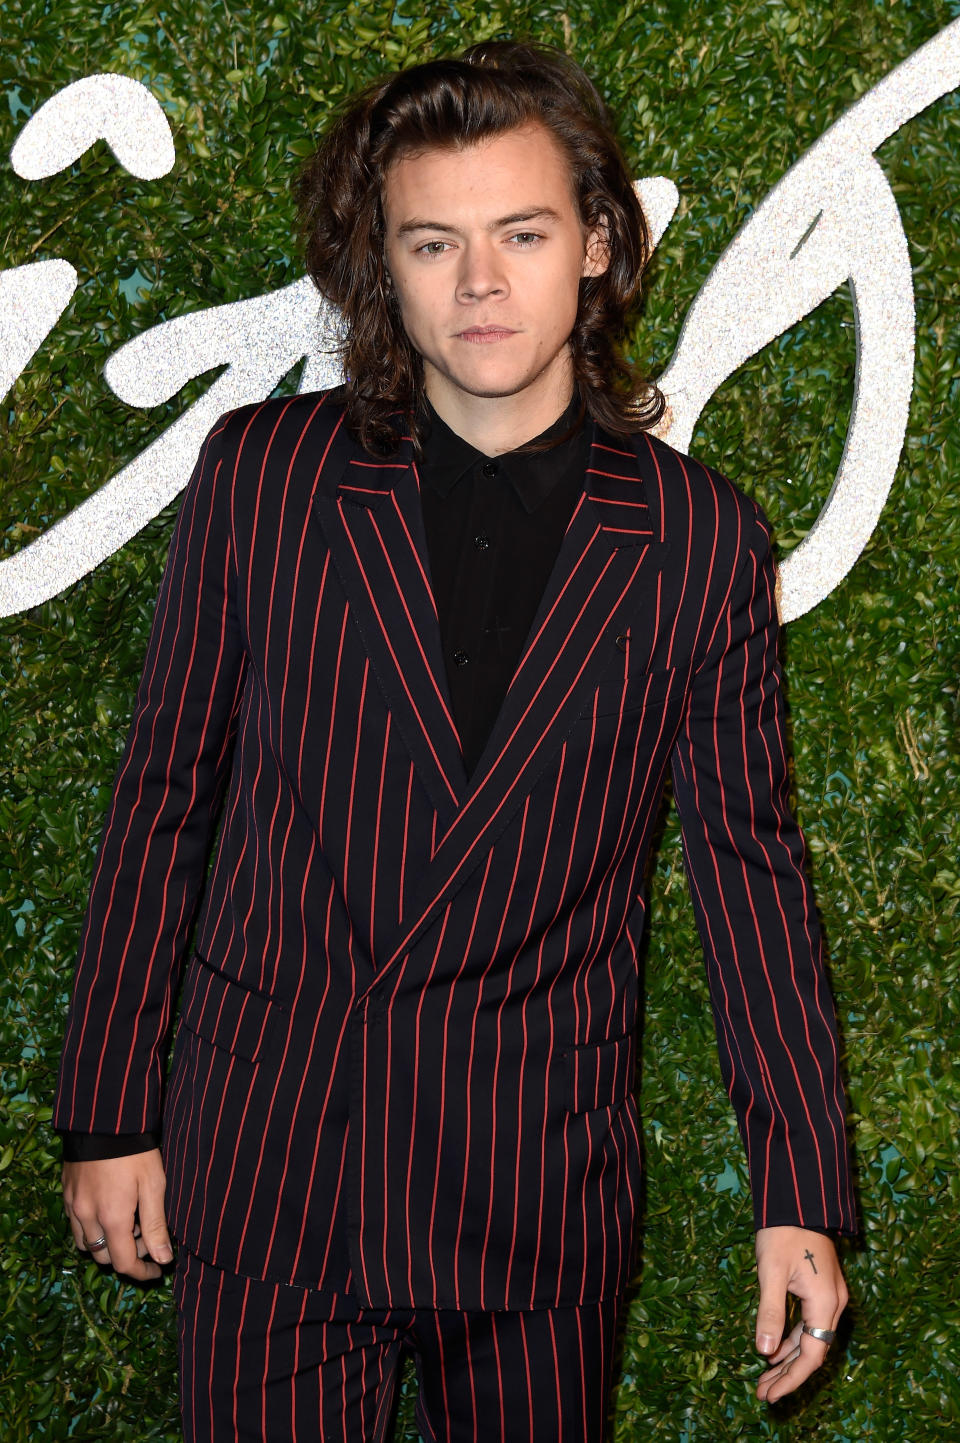 his hair is shoulder-length and he's wearing a pinstripe suit